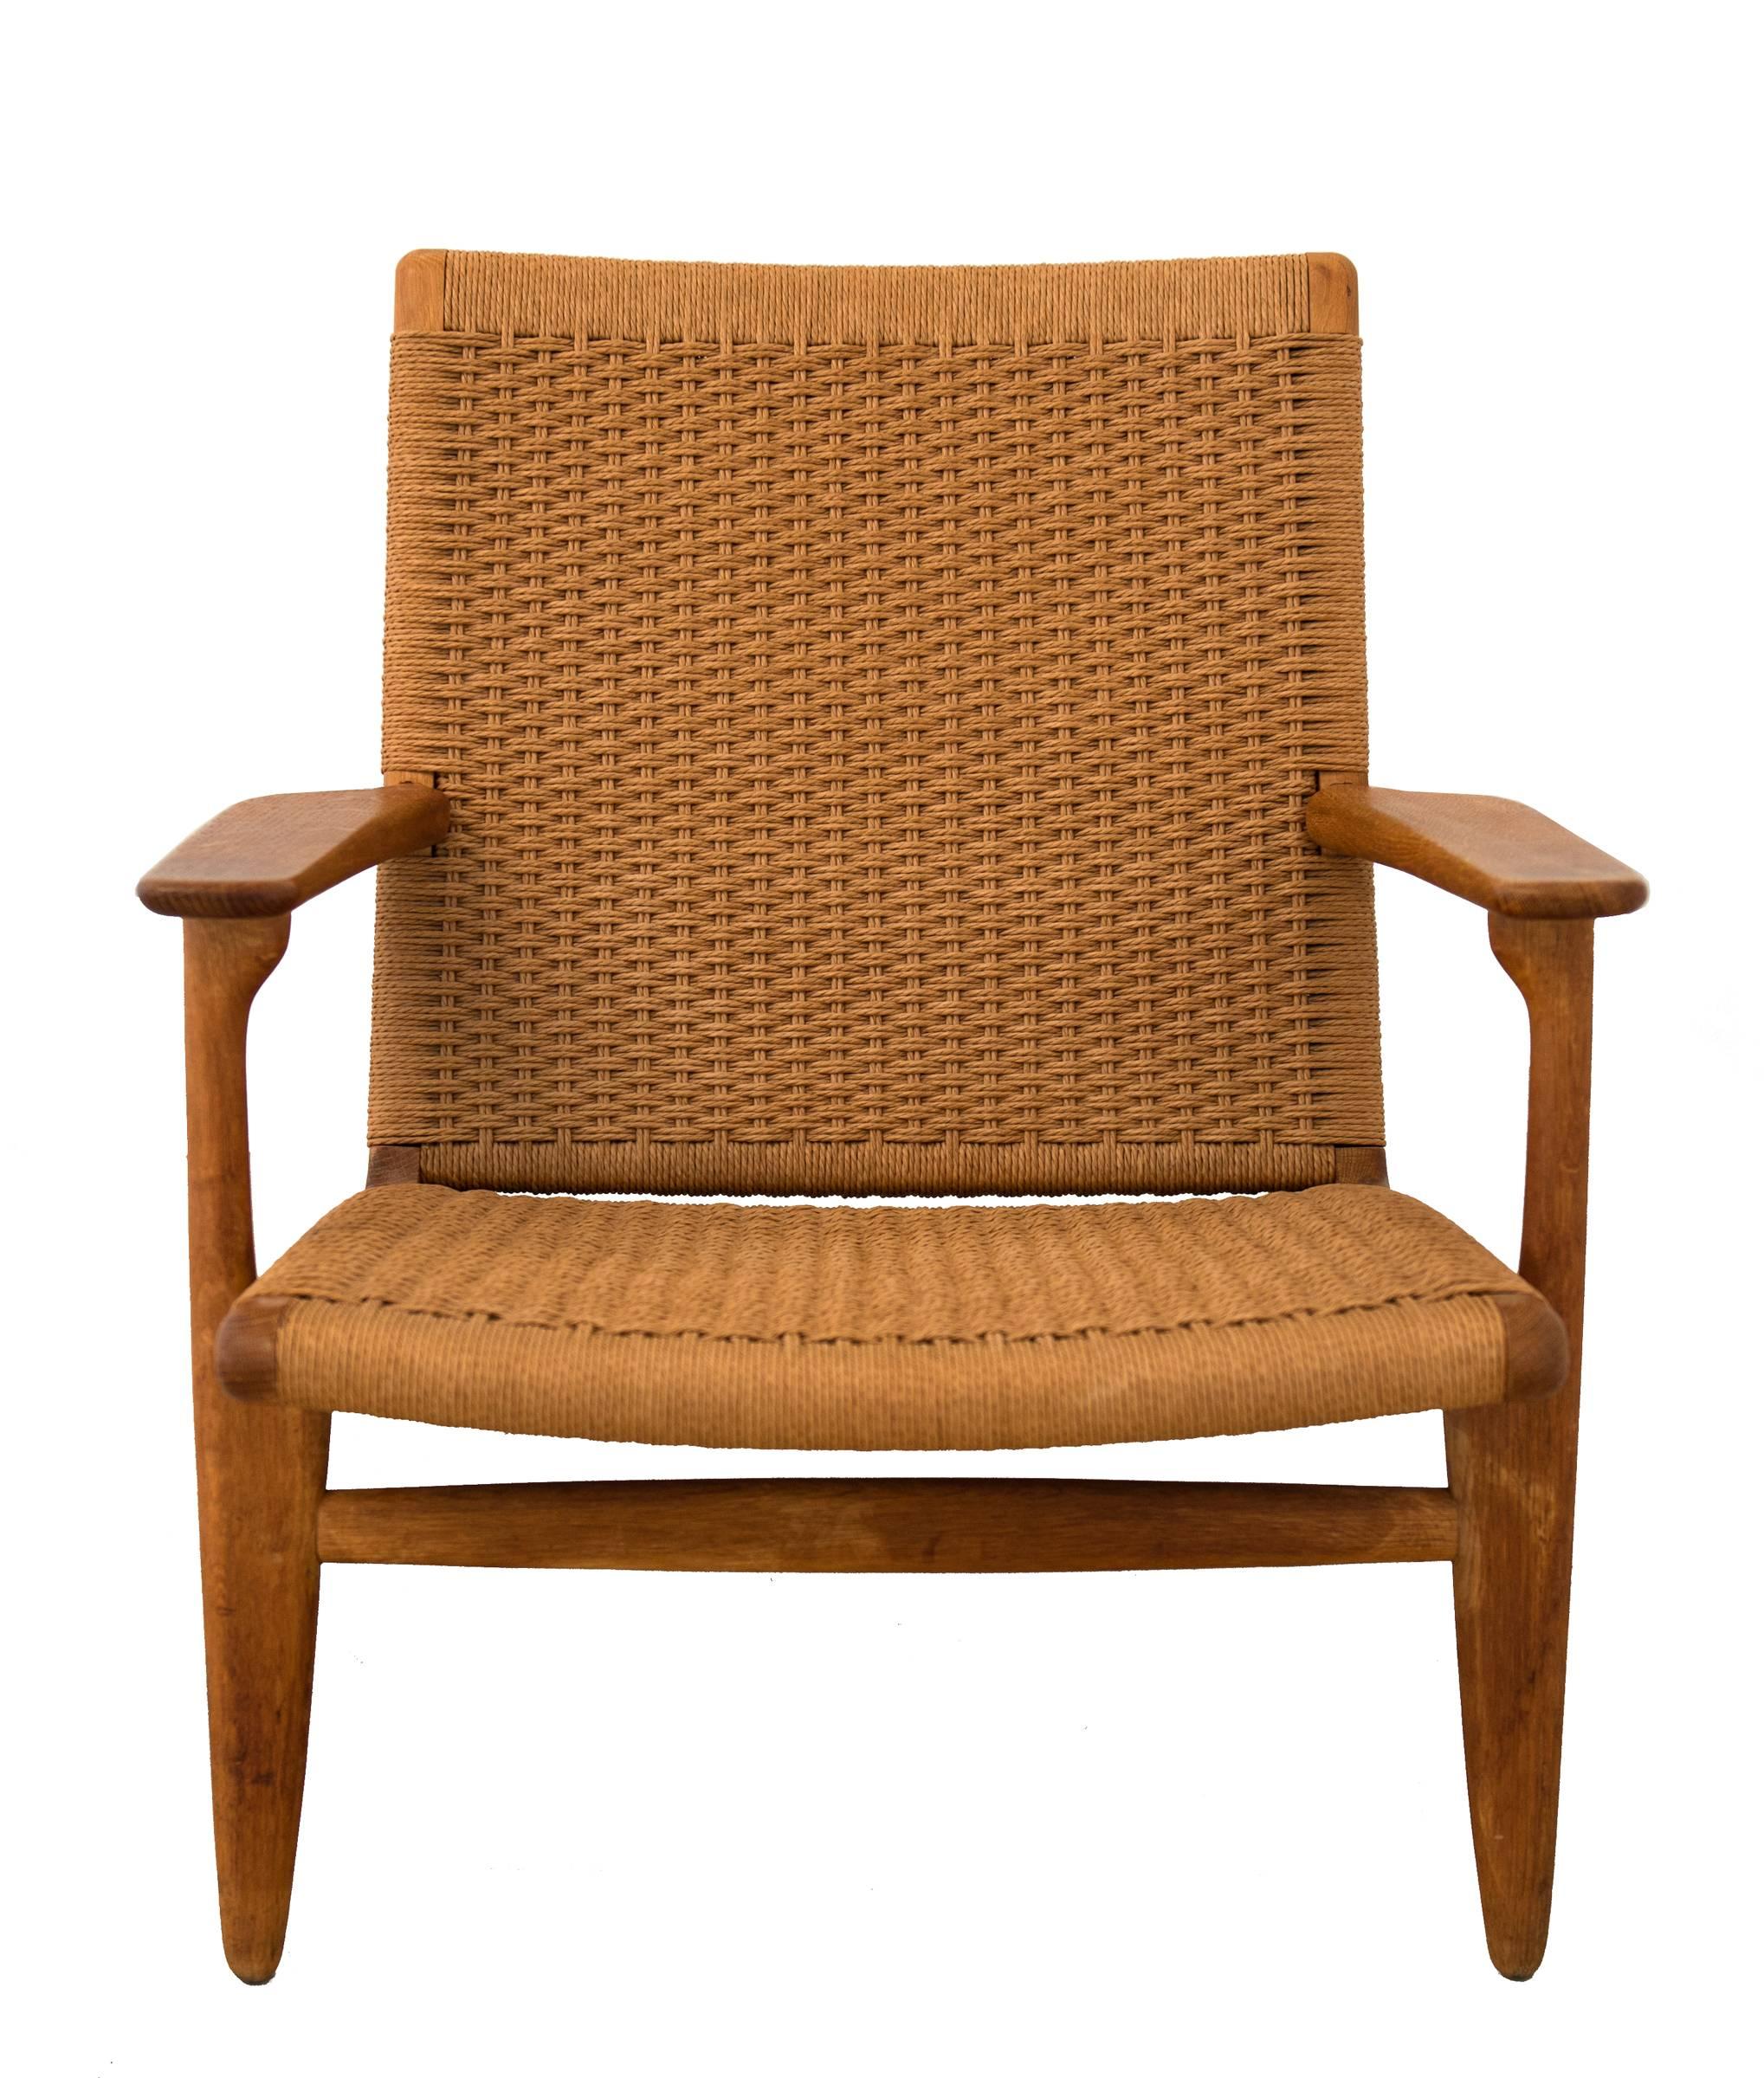 Hans Wegner CH25 chair. Excellent, condition with a warm patina. Oak frame.